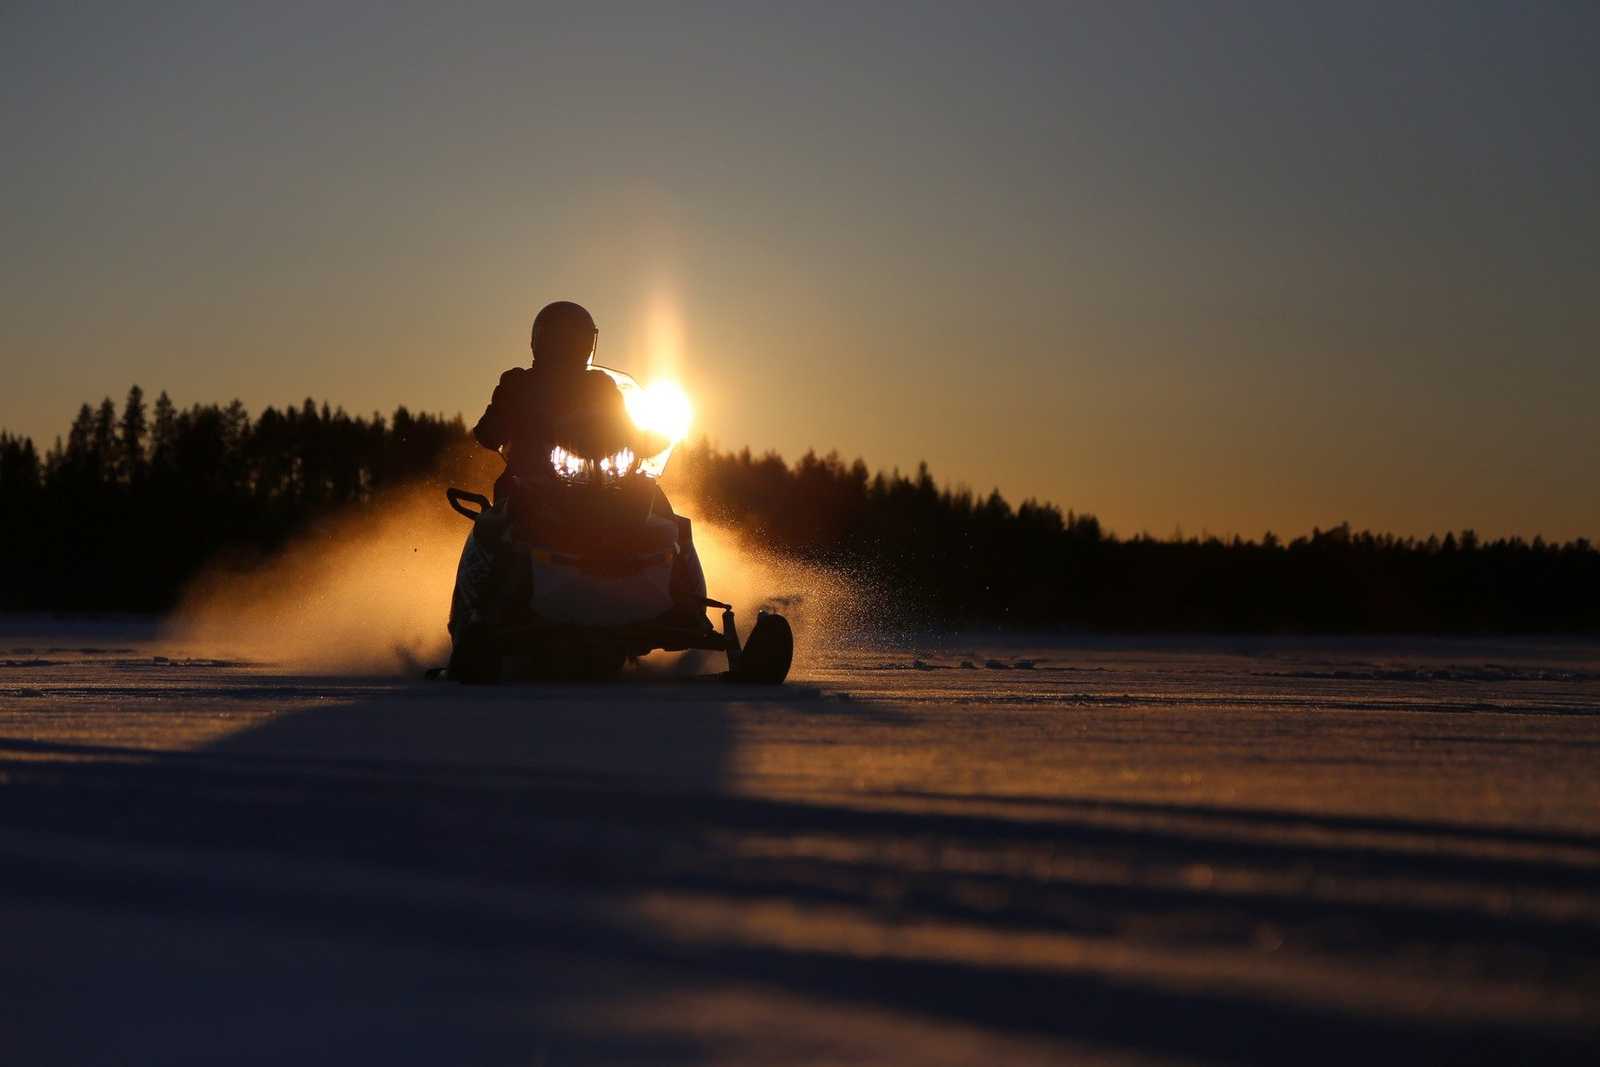 Snowmobiling in Mont Tremblant - snowmobiler at sunset